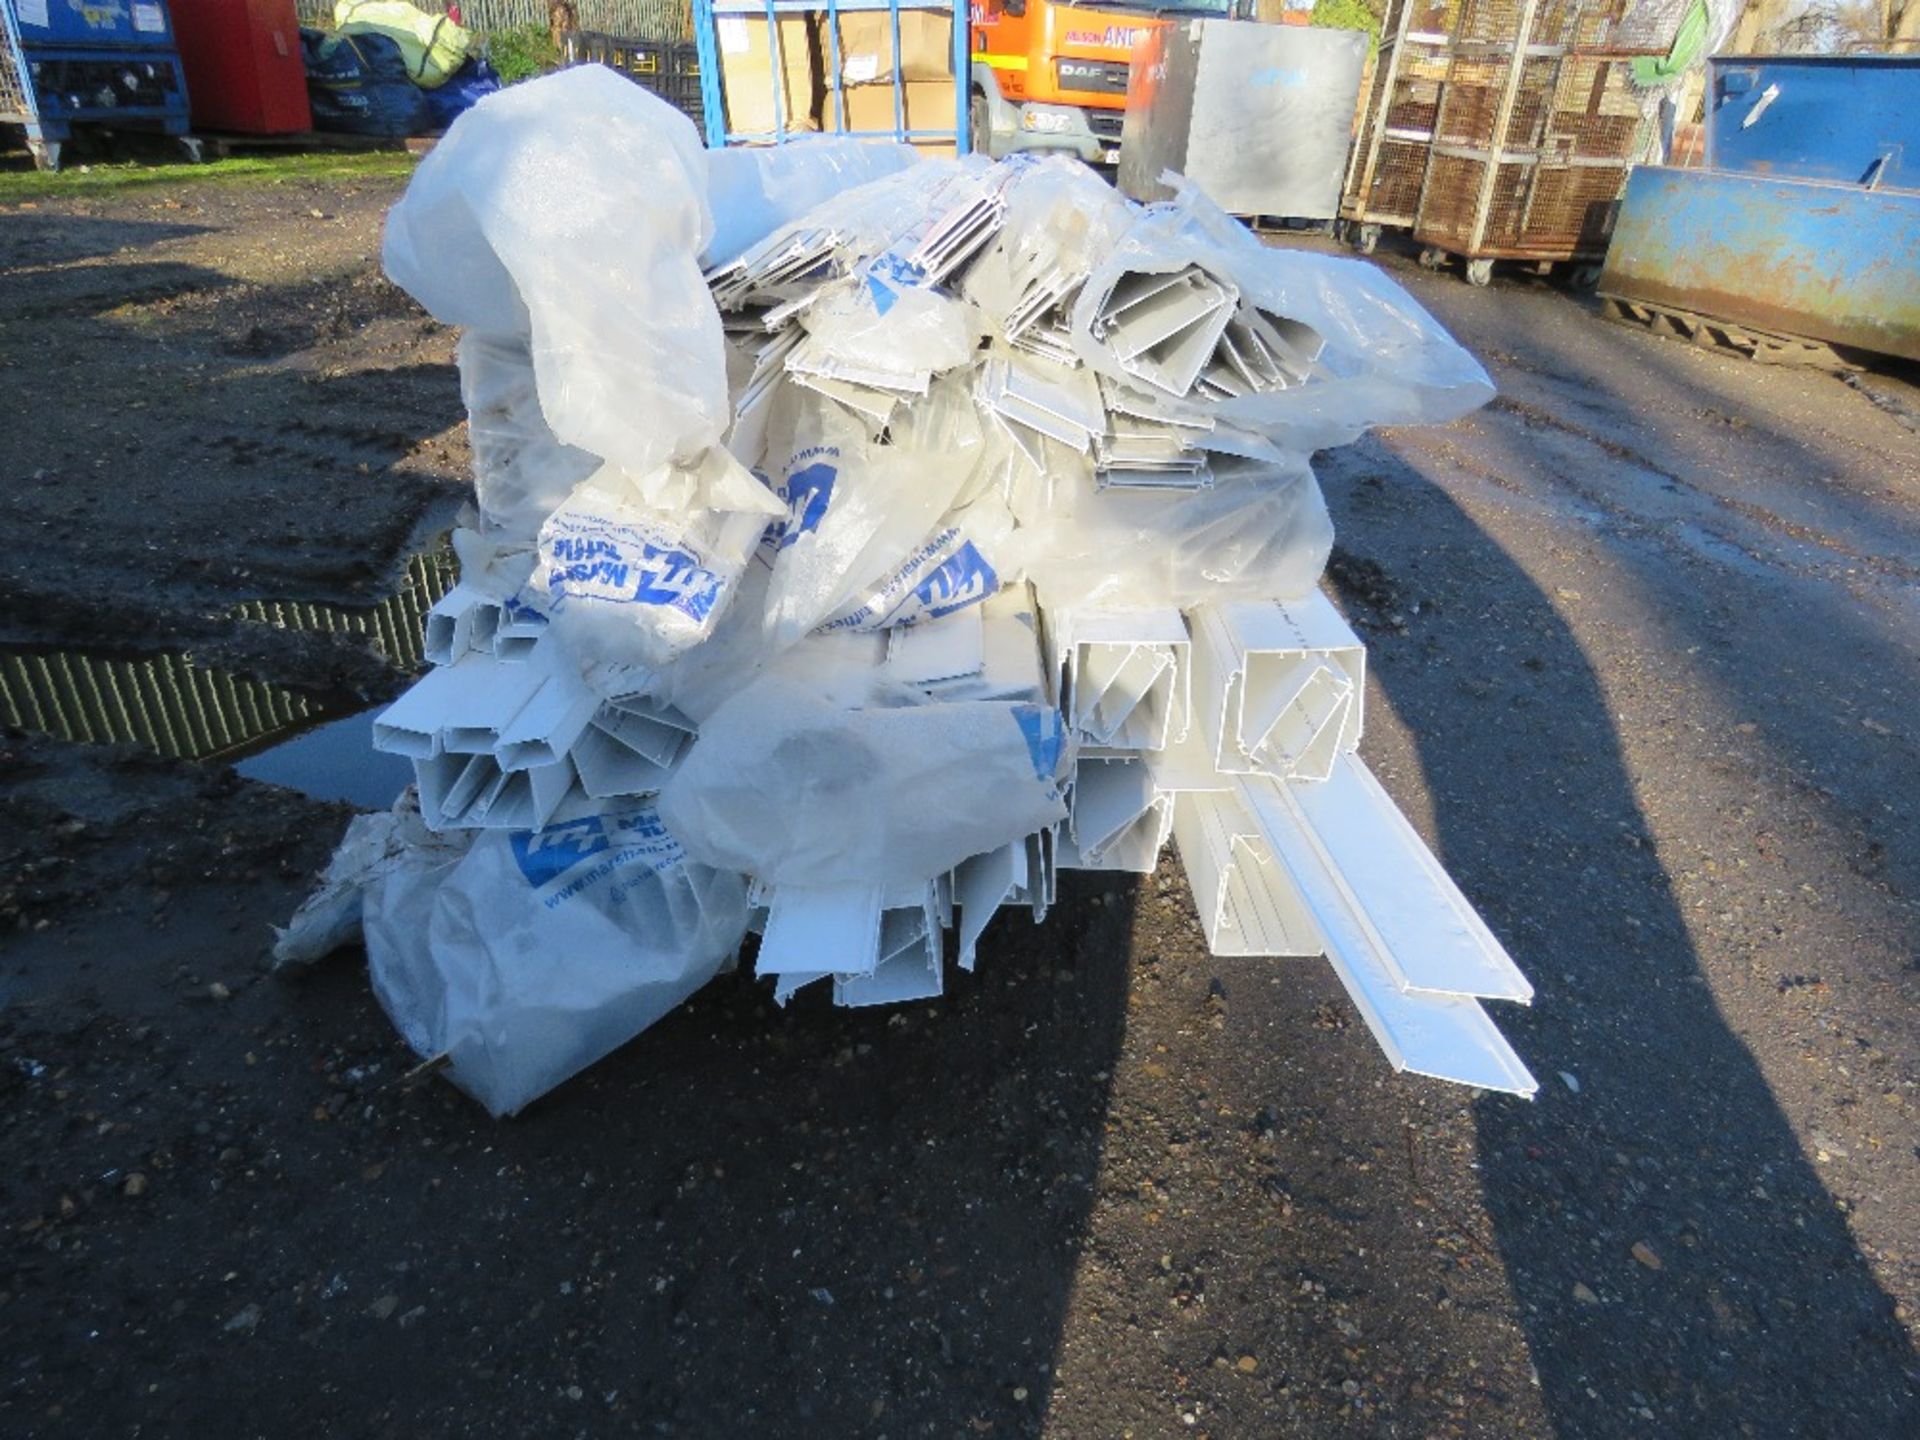 LARGE QUANTITY OF PLASTIC CABLE DUCTING PARTS 9-12FT APPROX... SOURCED FROM COMPANY LIQUIDATION. - Image 3 of 8